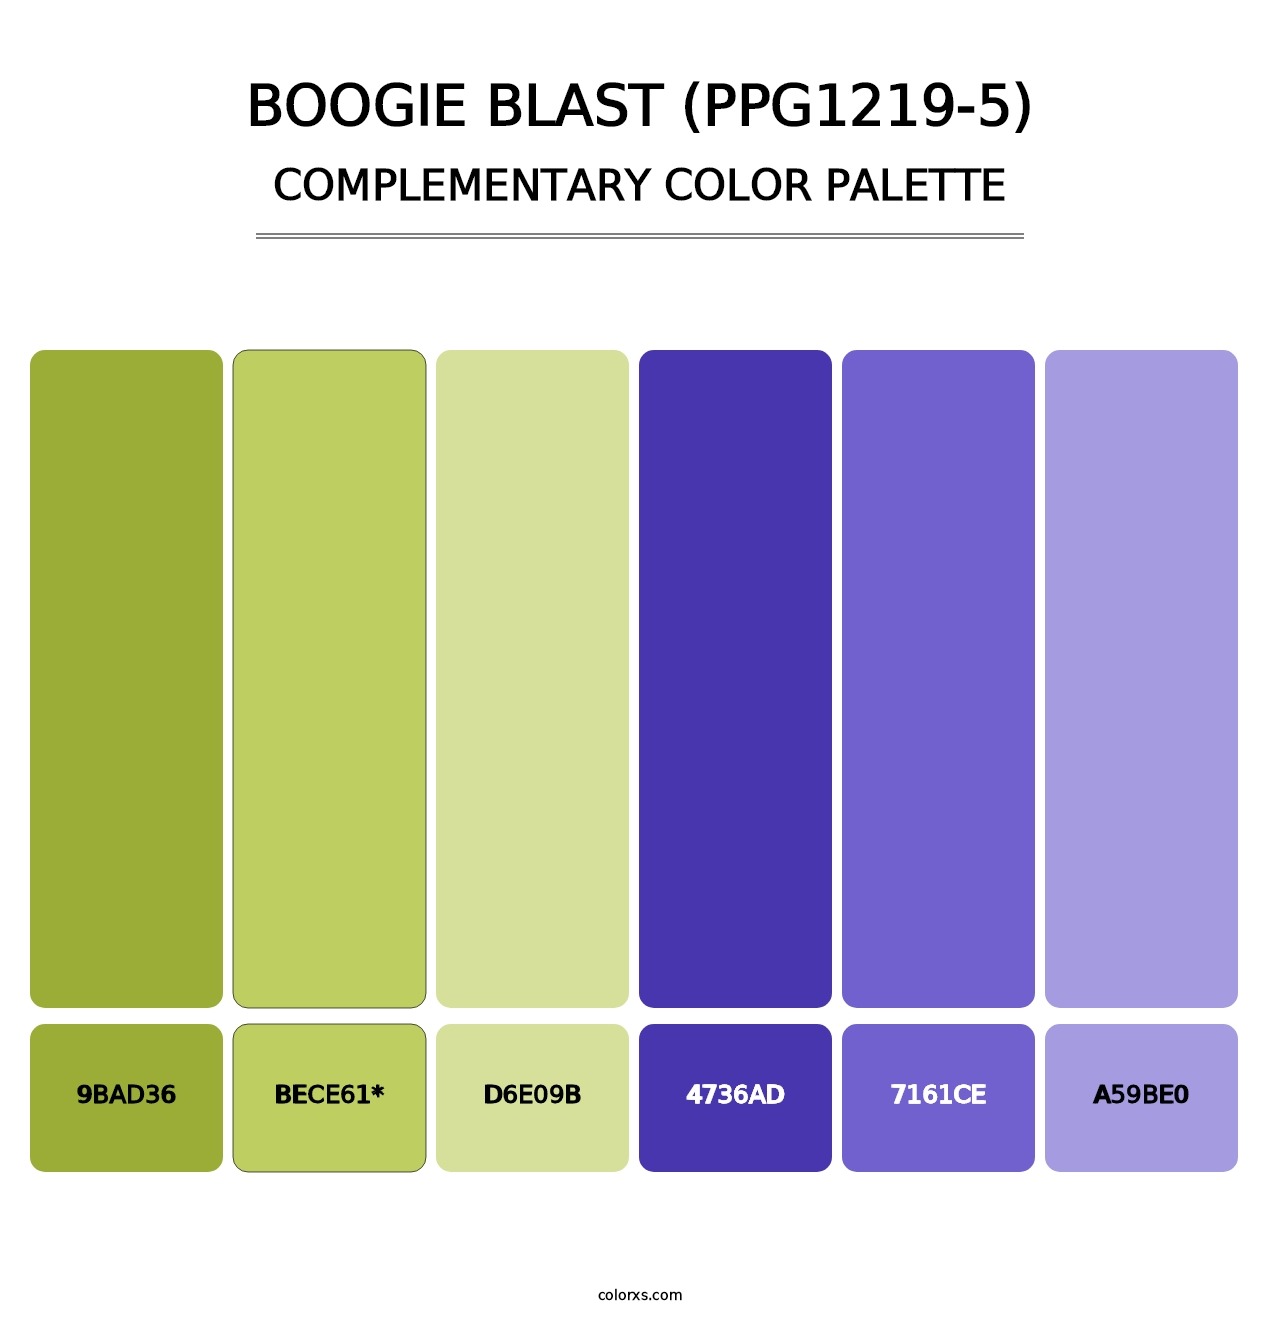 Boogie Blast (PPG1219-5) - Complementary Color Palette